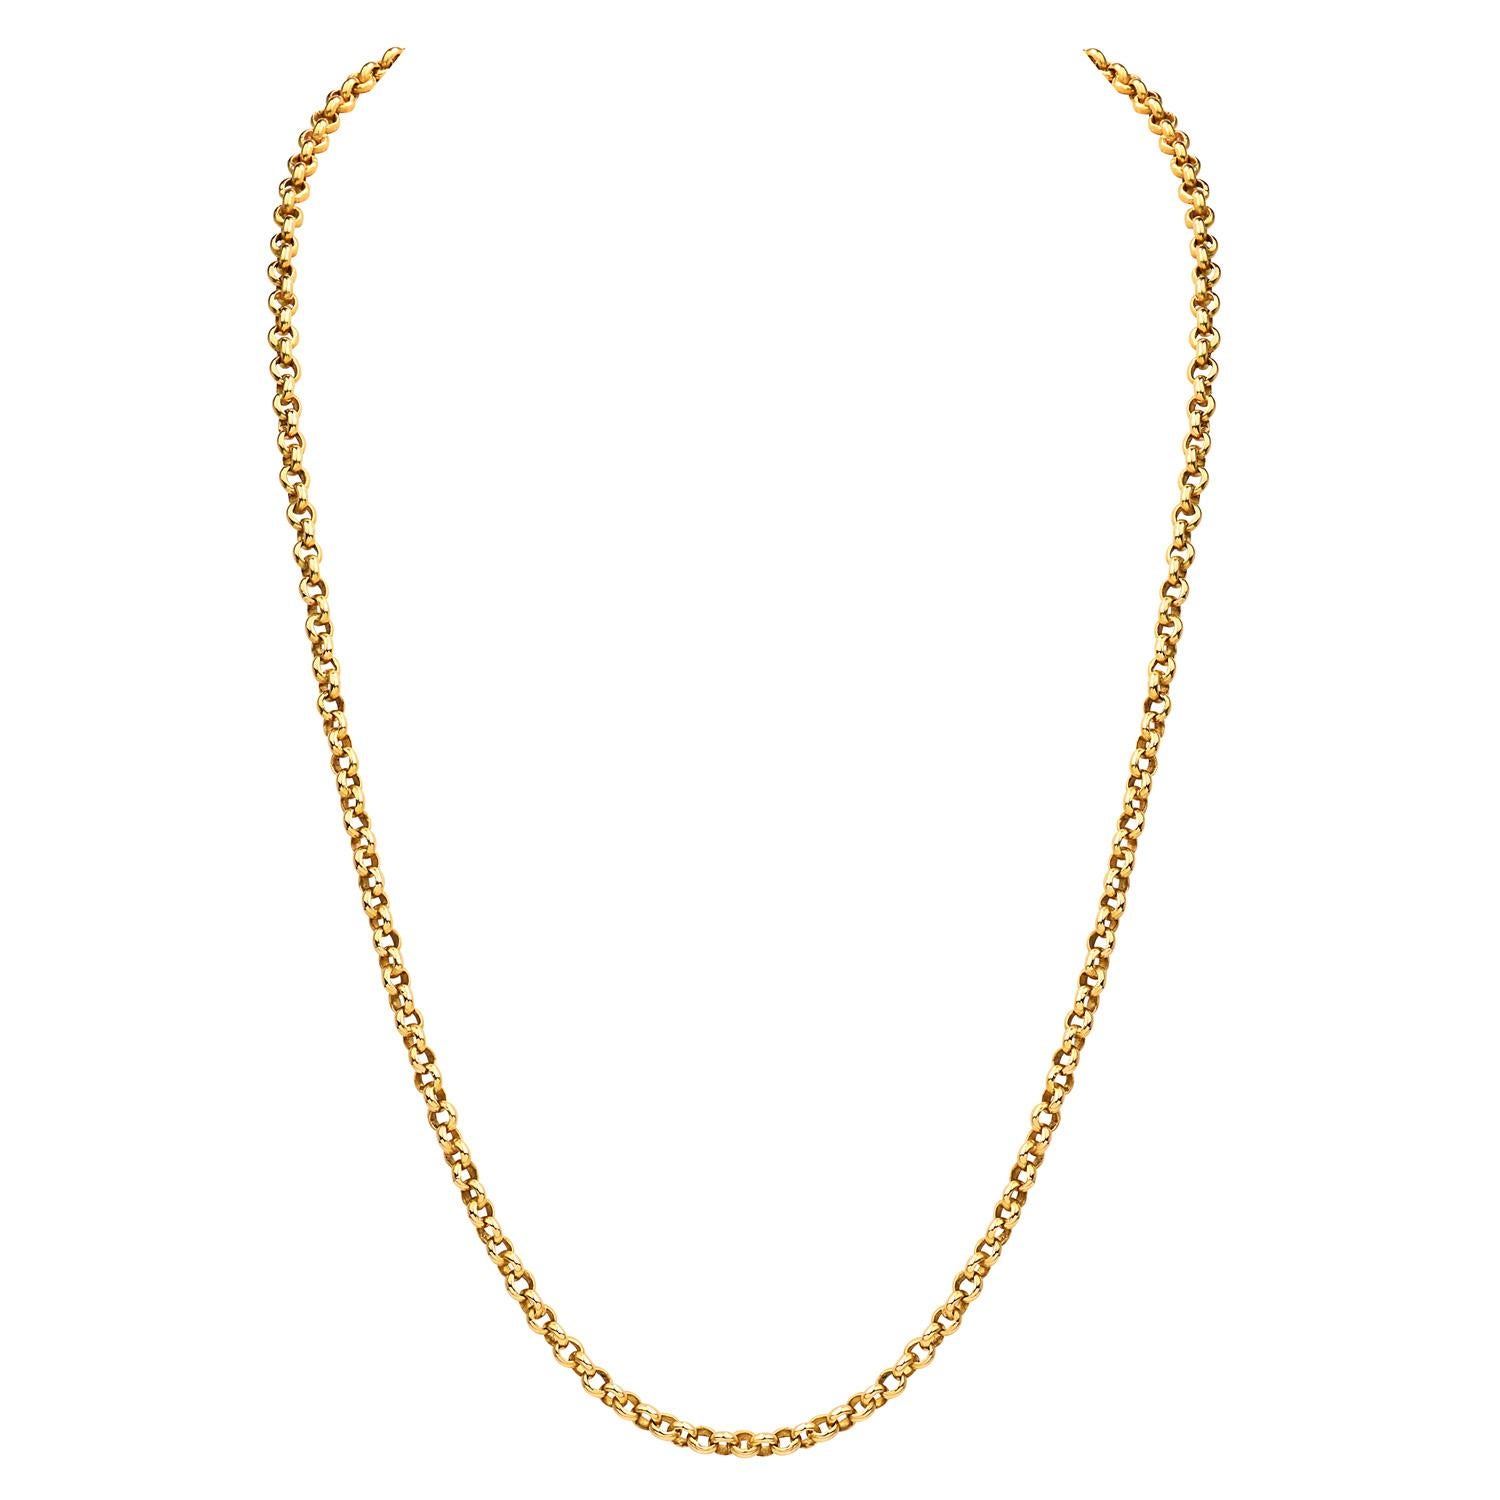 Retro Vintage 18k Yellow Gold Round Link Chain Necklace